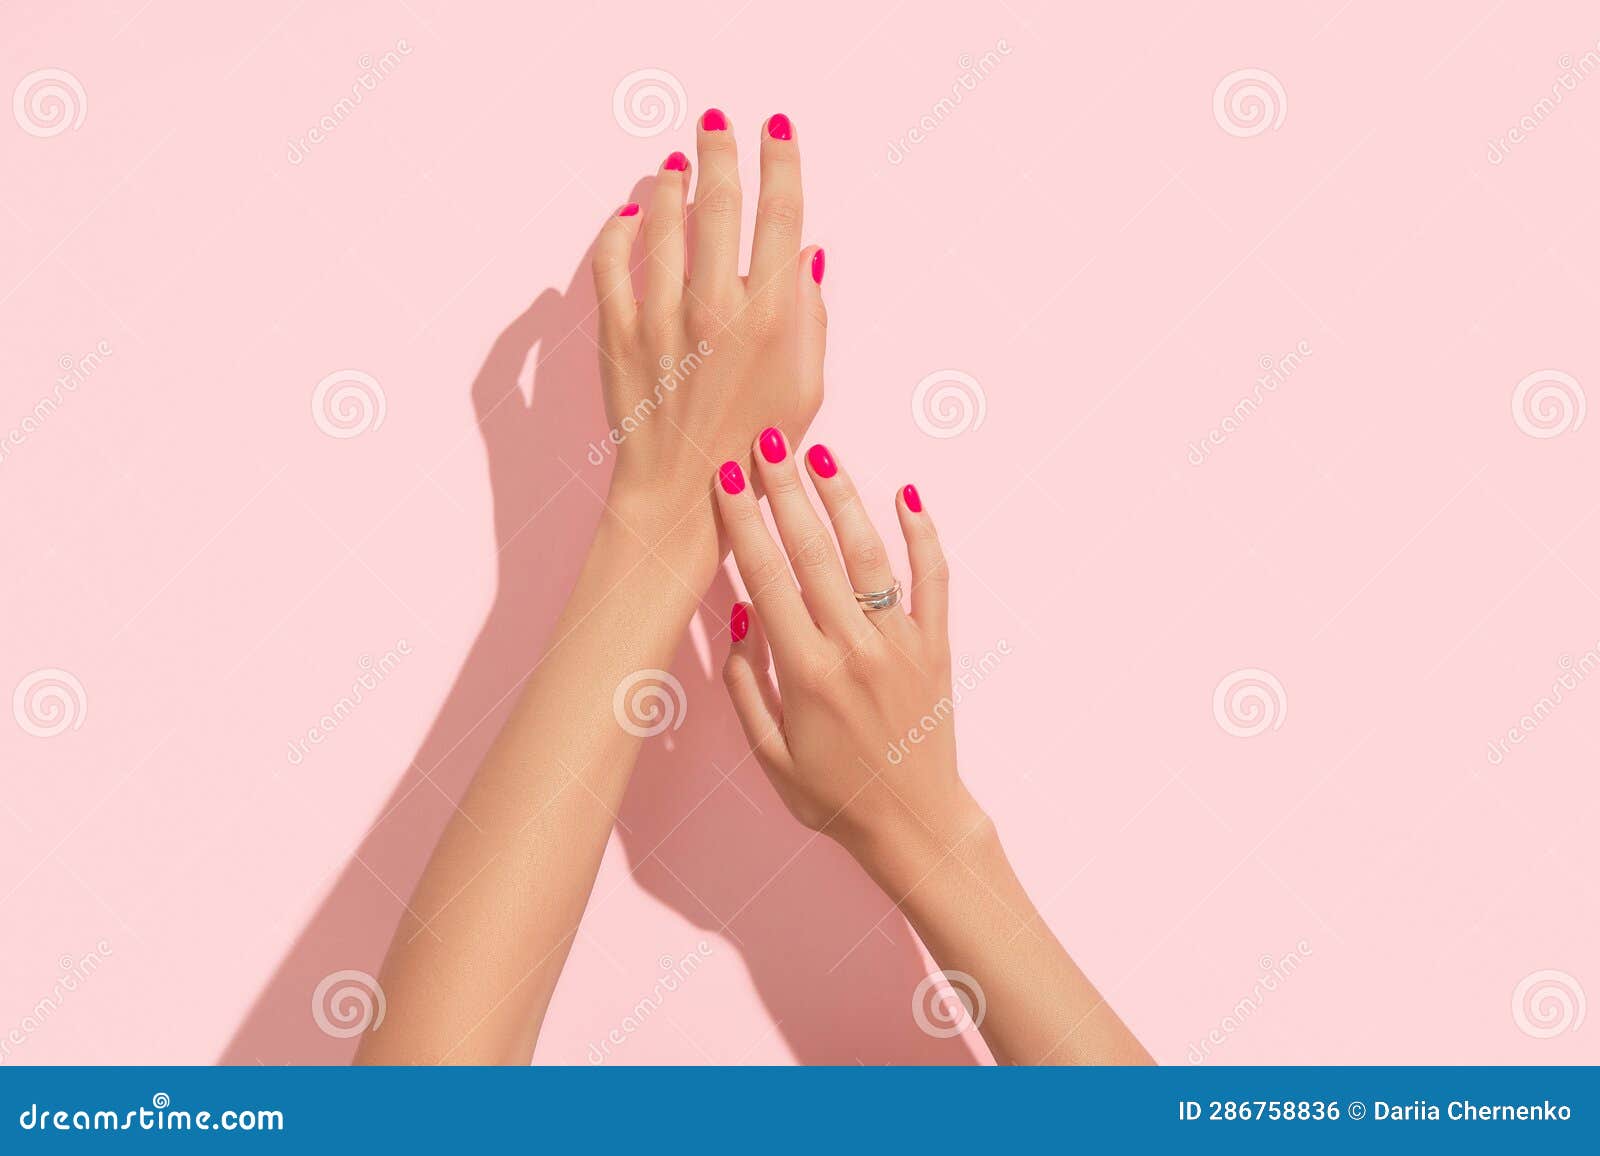 Black and Pink Nail Design for Hands - wide 4